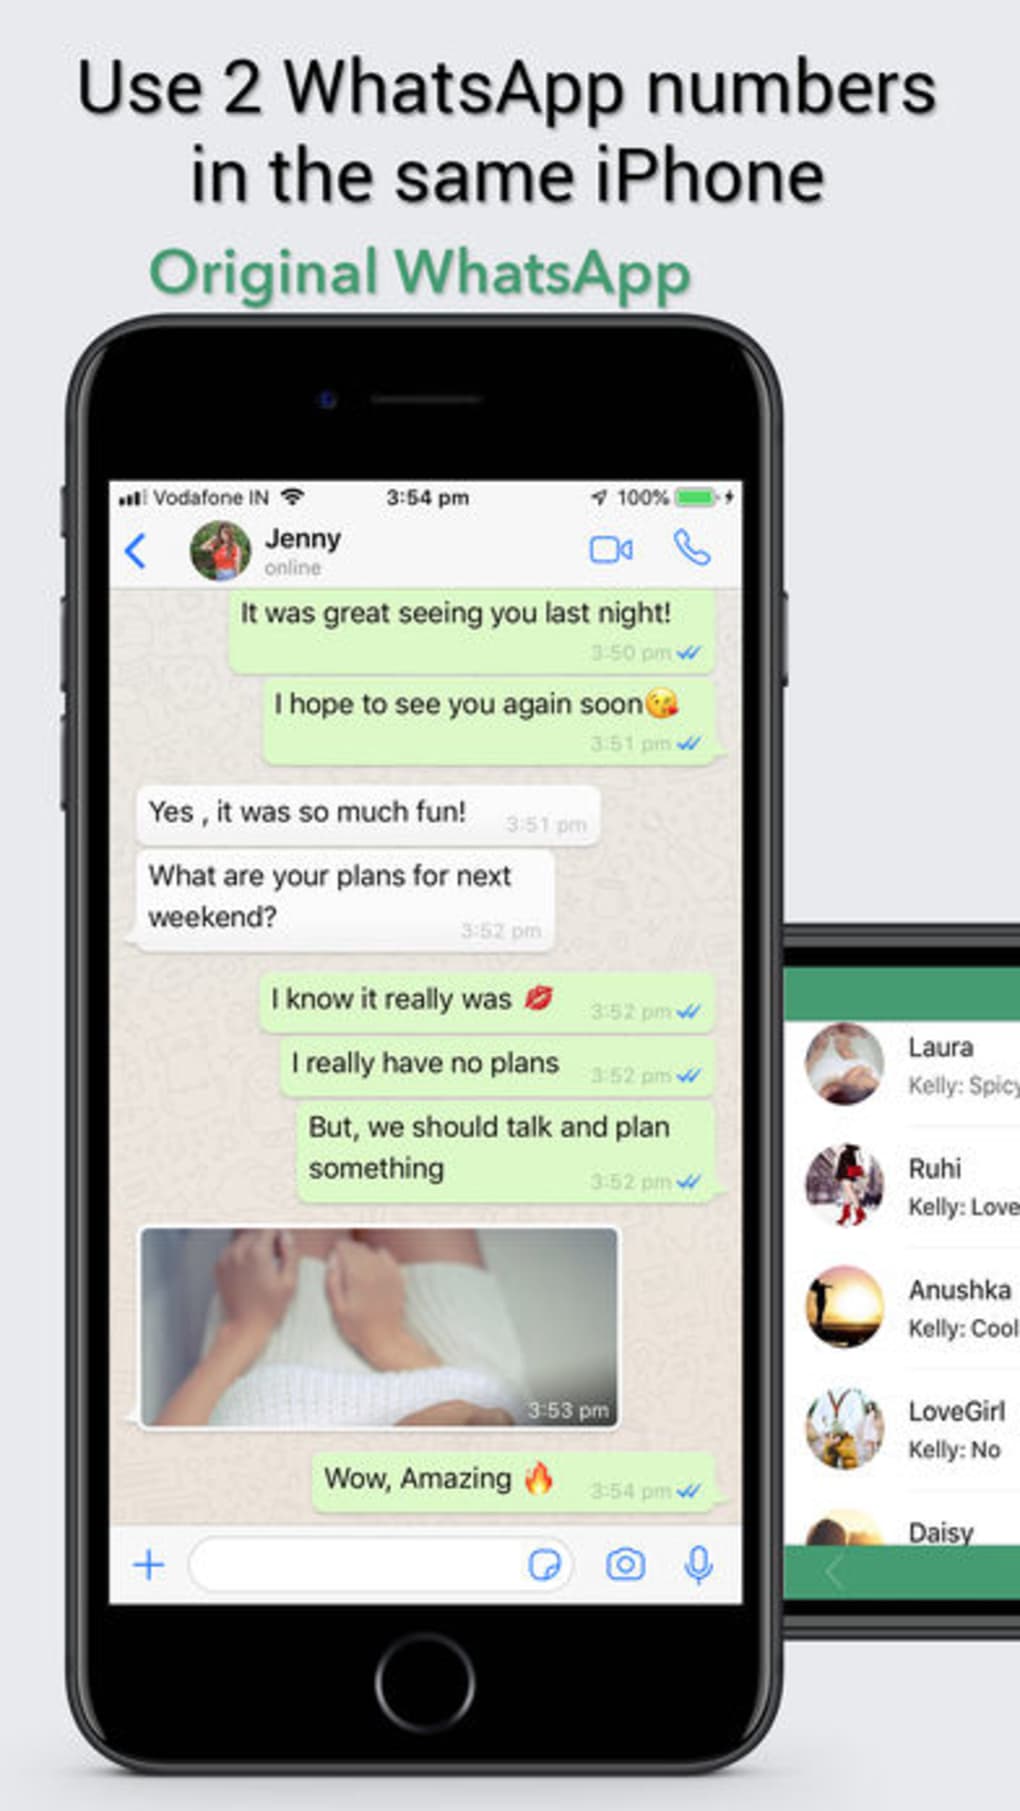 Dual Messenger For Whatsapp Wa For Iphone Download